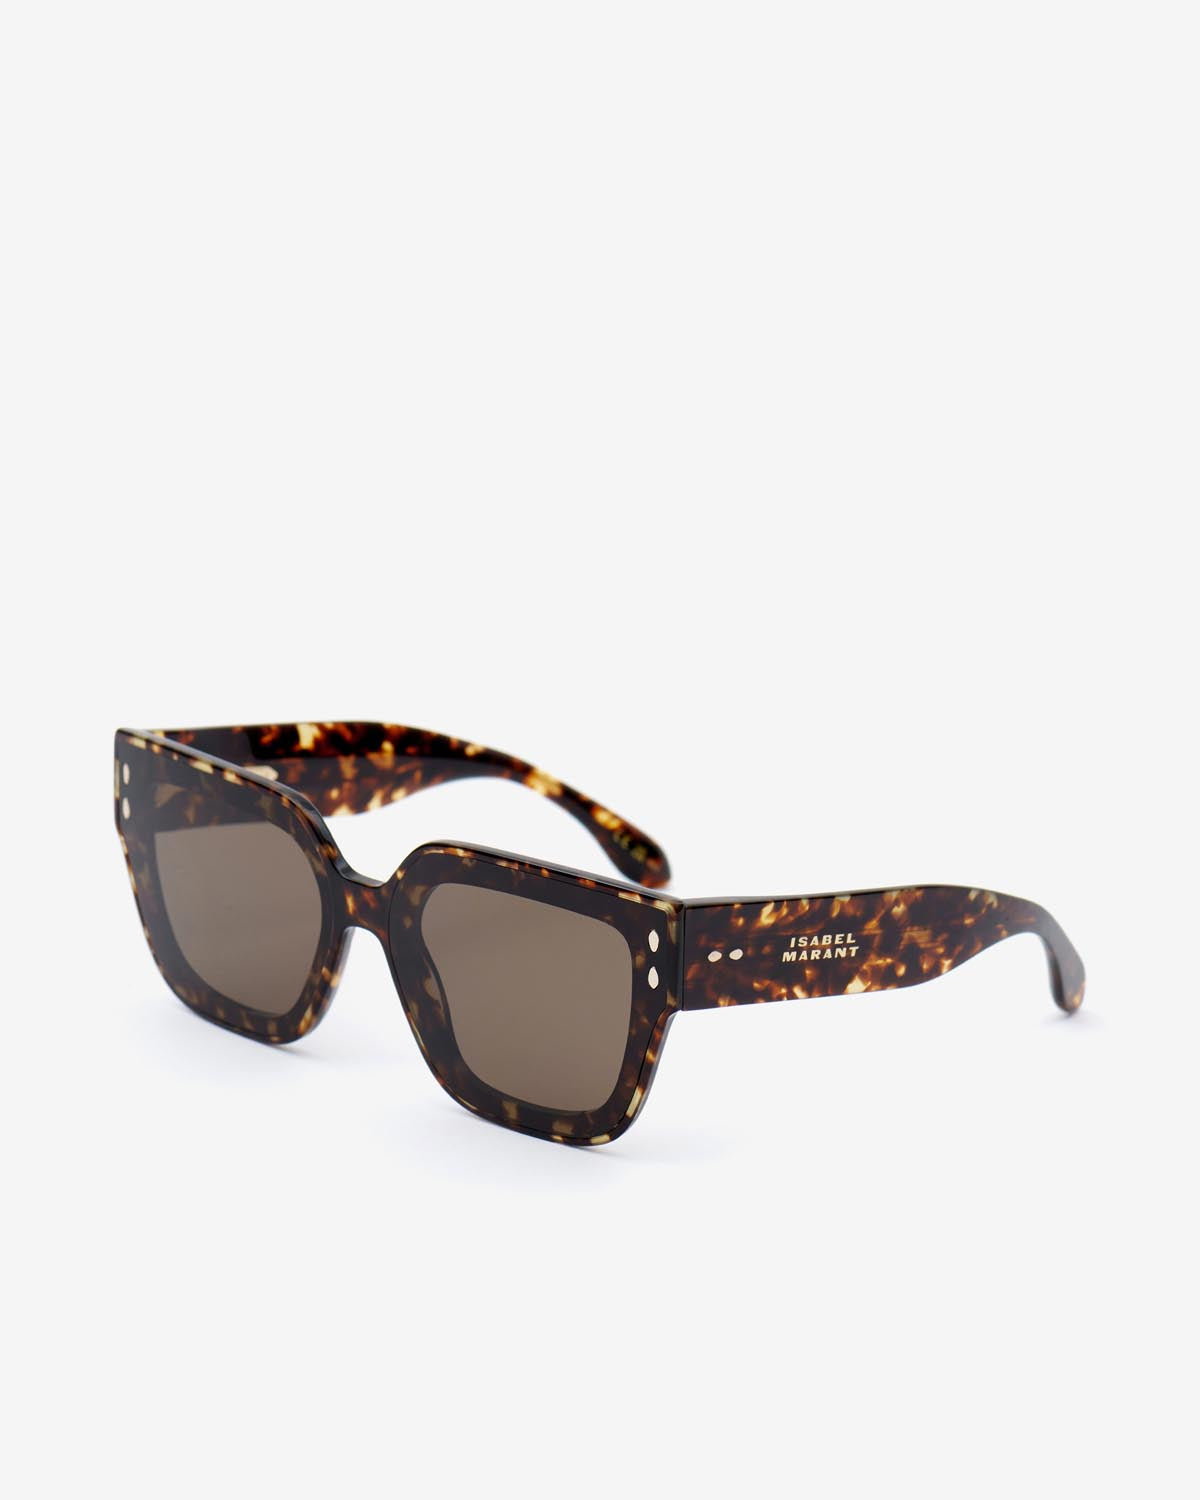 Sunglasses Woman and Man | ISABEL MARANT Official Online Store